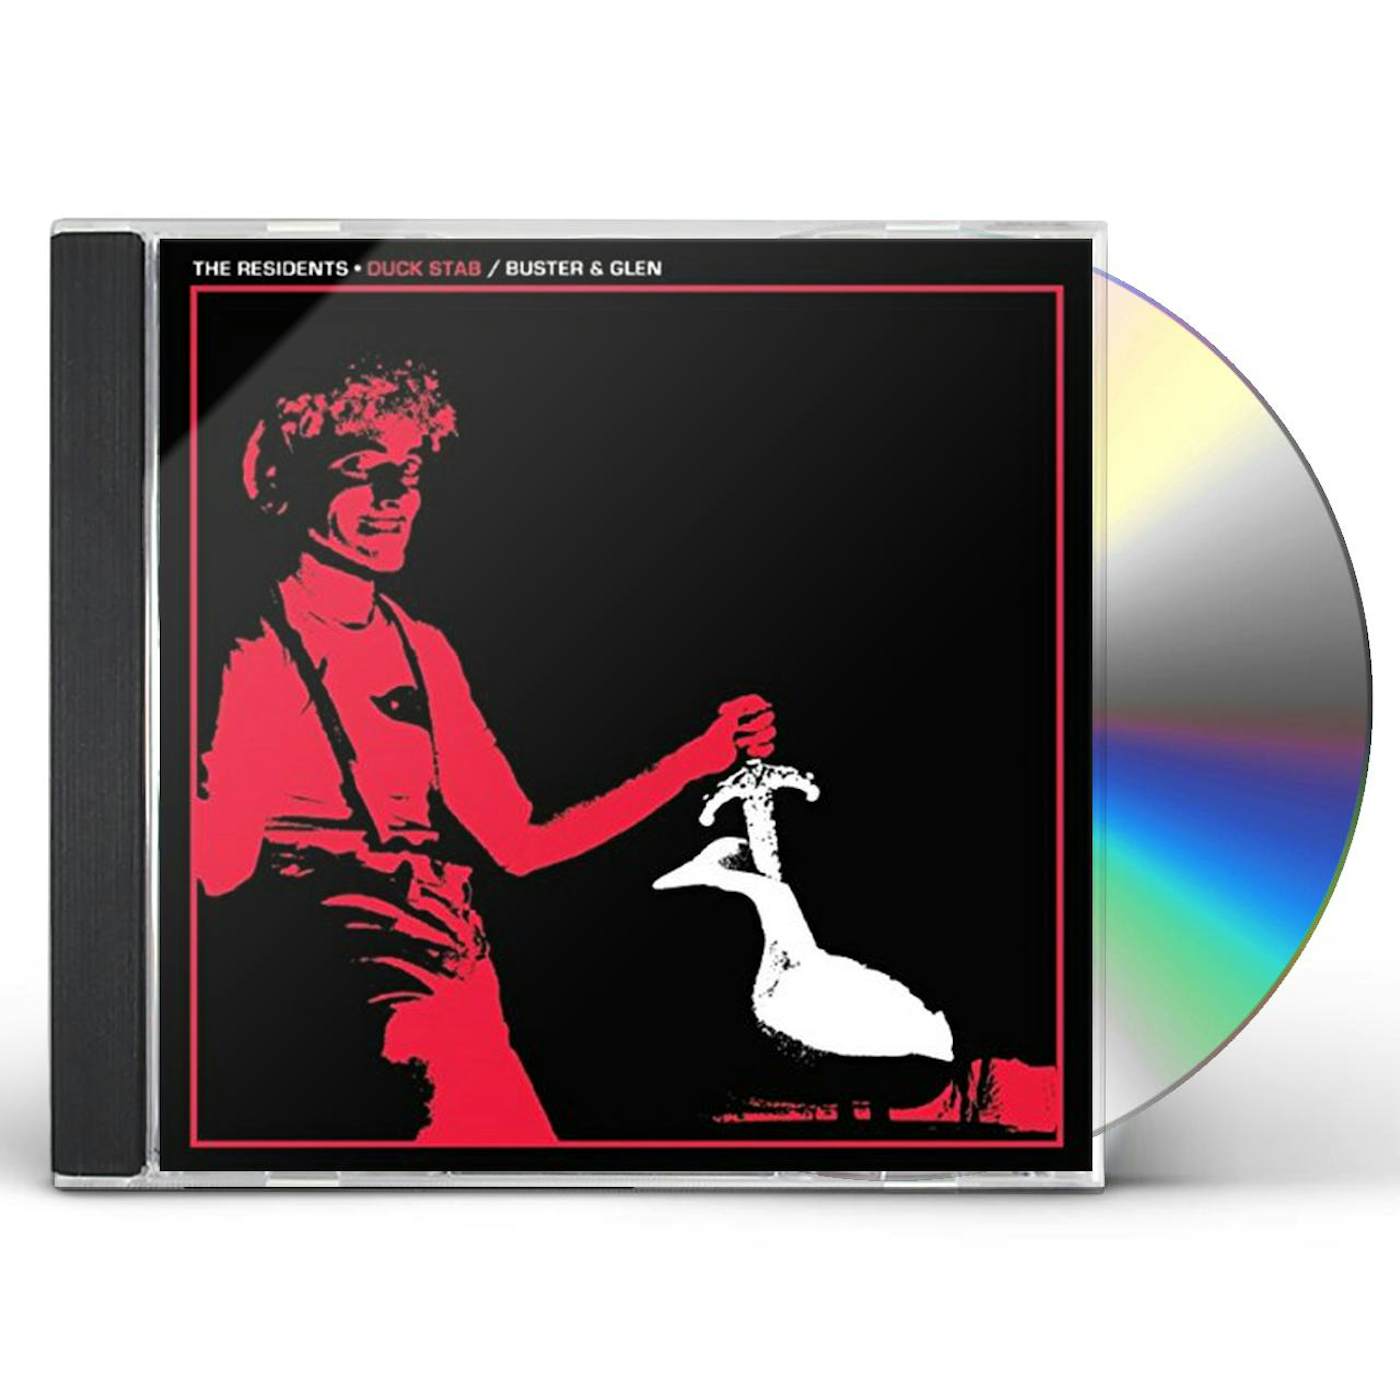 The Residents DUCK STAB / BUSTER & GLEN (PRESERVED EDITION) CD